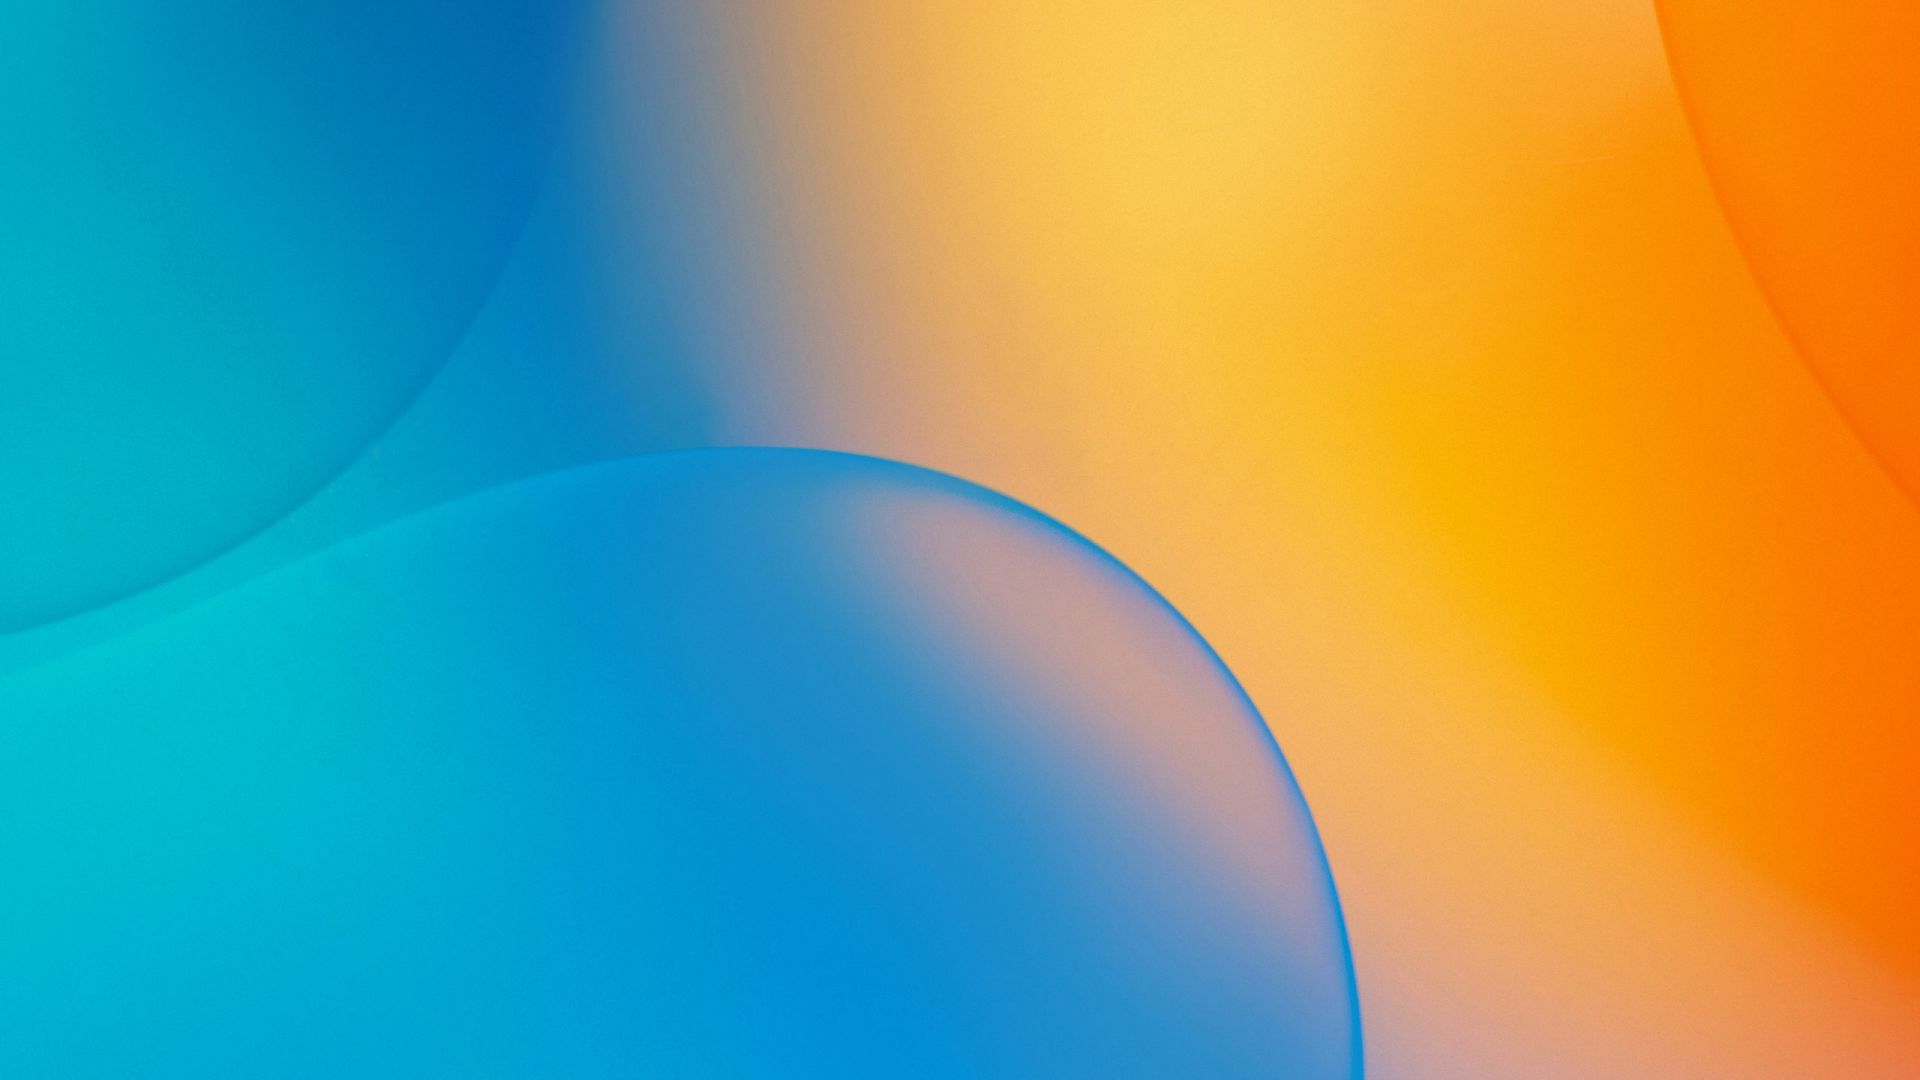 LG G7 ThinQ, abstract, colorful, Android 8.0, 4K (horizontal)